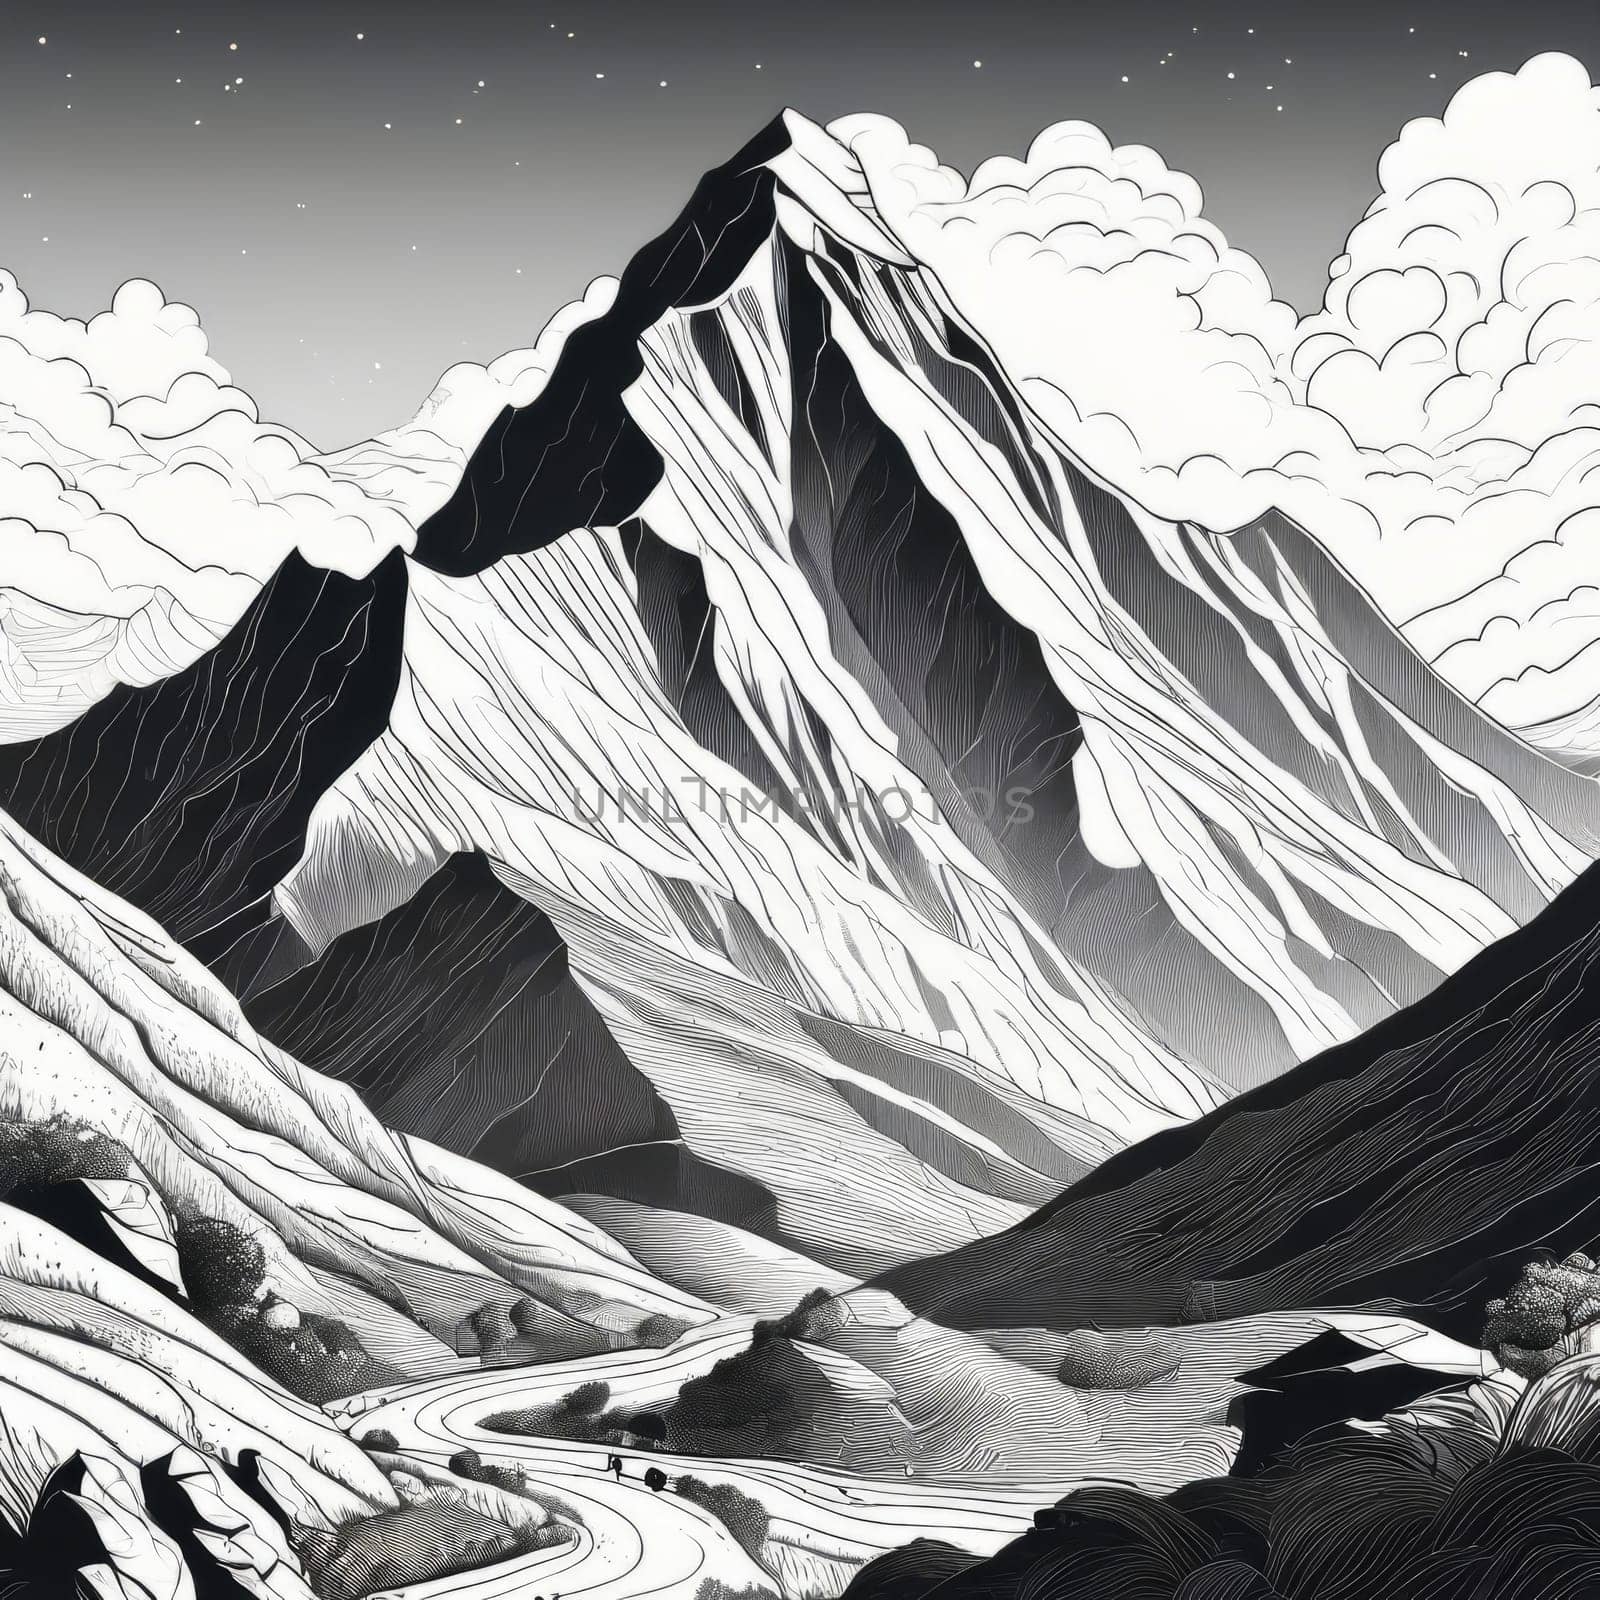 Stunning black, white drawing of majestic mountain range. Nature themed publications, website, travel brochure, meditation app, even as decorative piece in home, offices to evoke sense of tranquility. by Angelsmoon